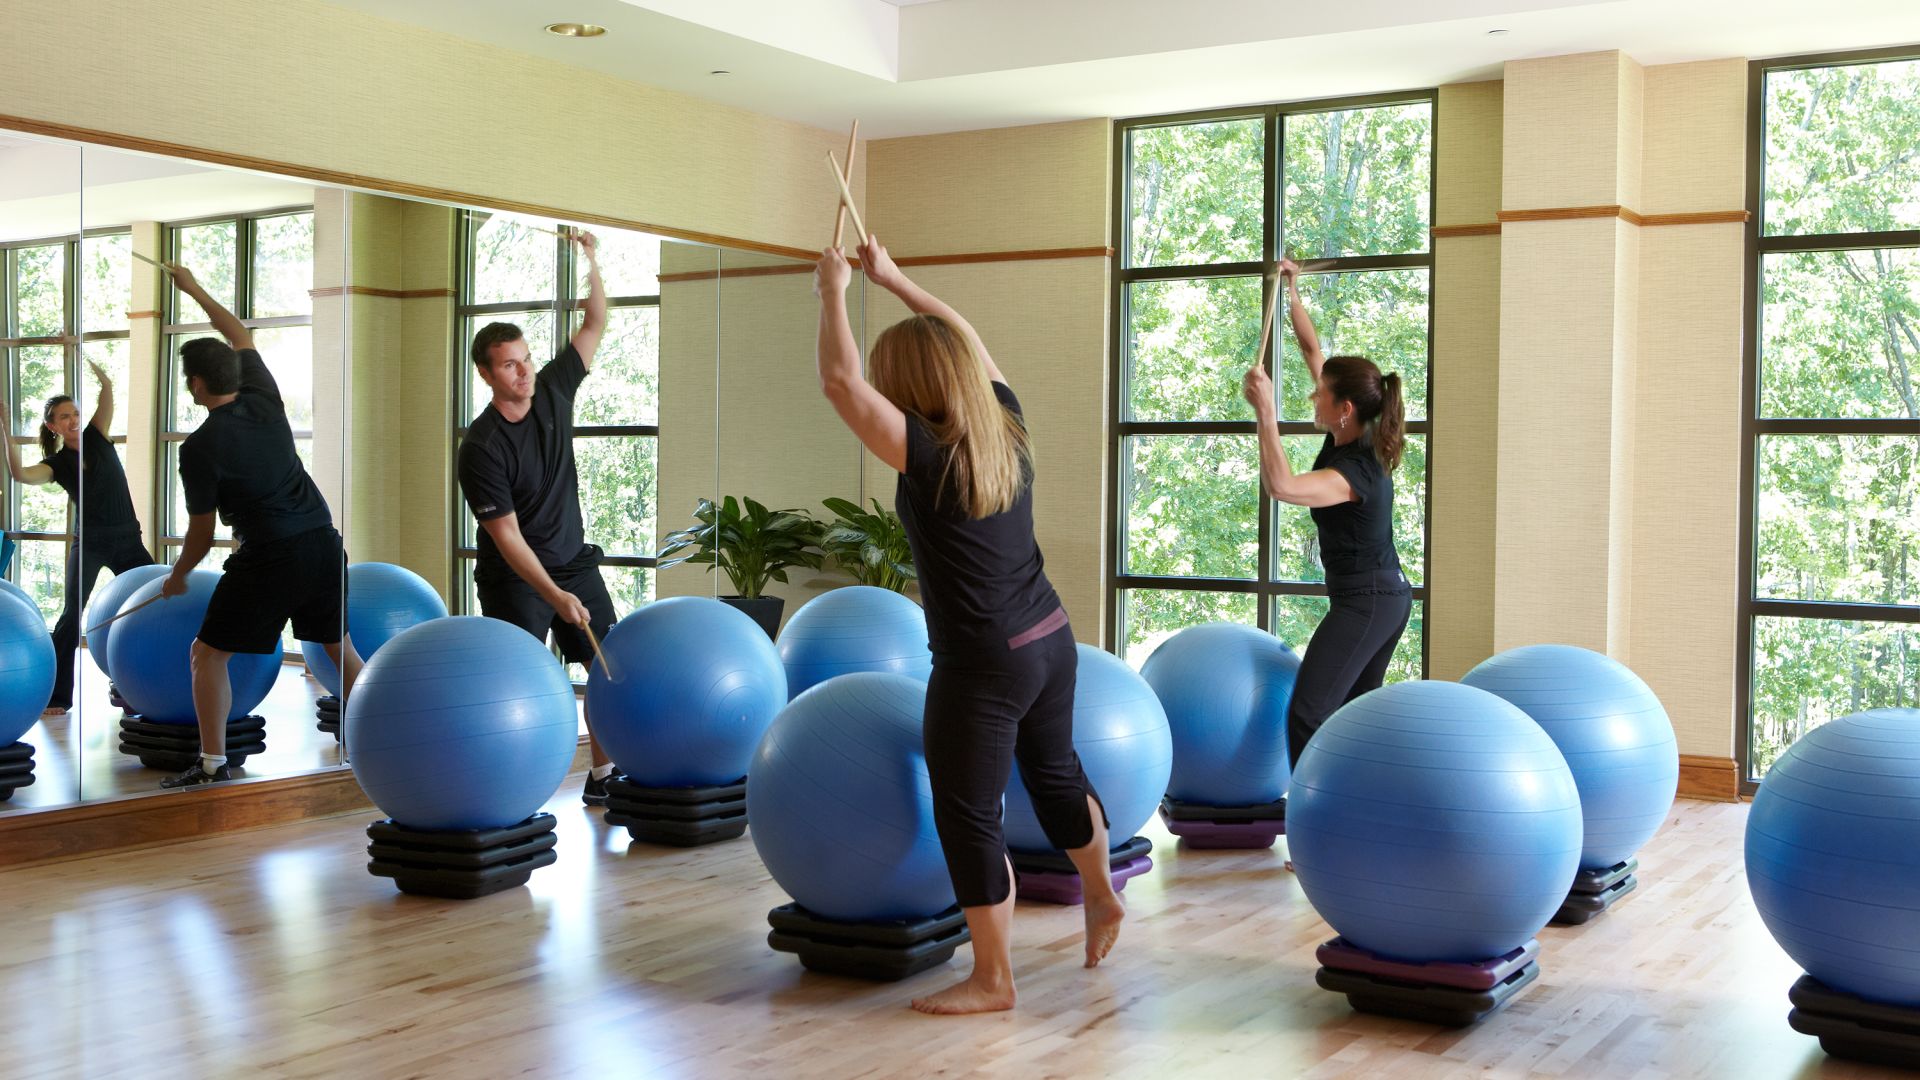 A Drums Alive class in a fitness studio at The Lodge at Woodloch